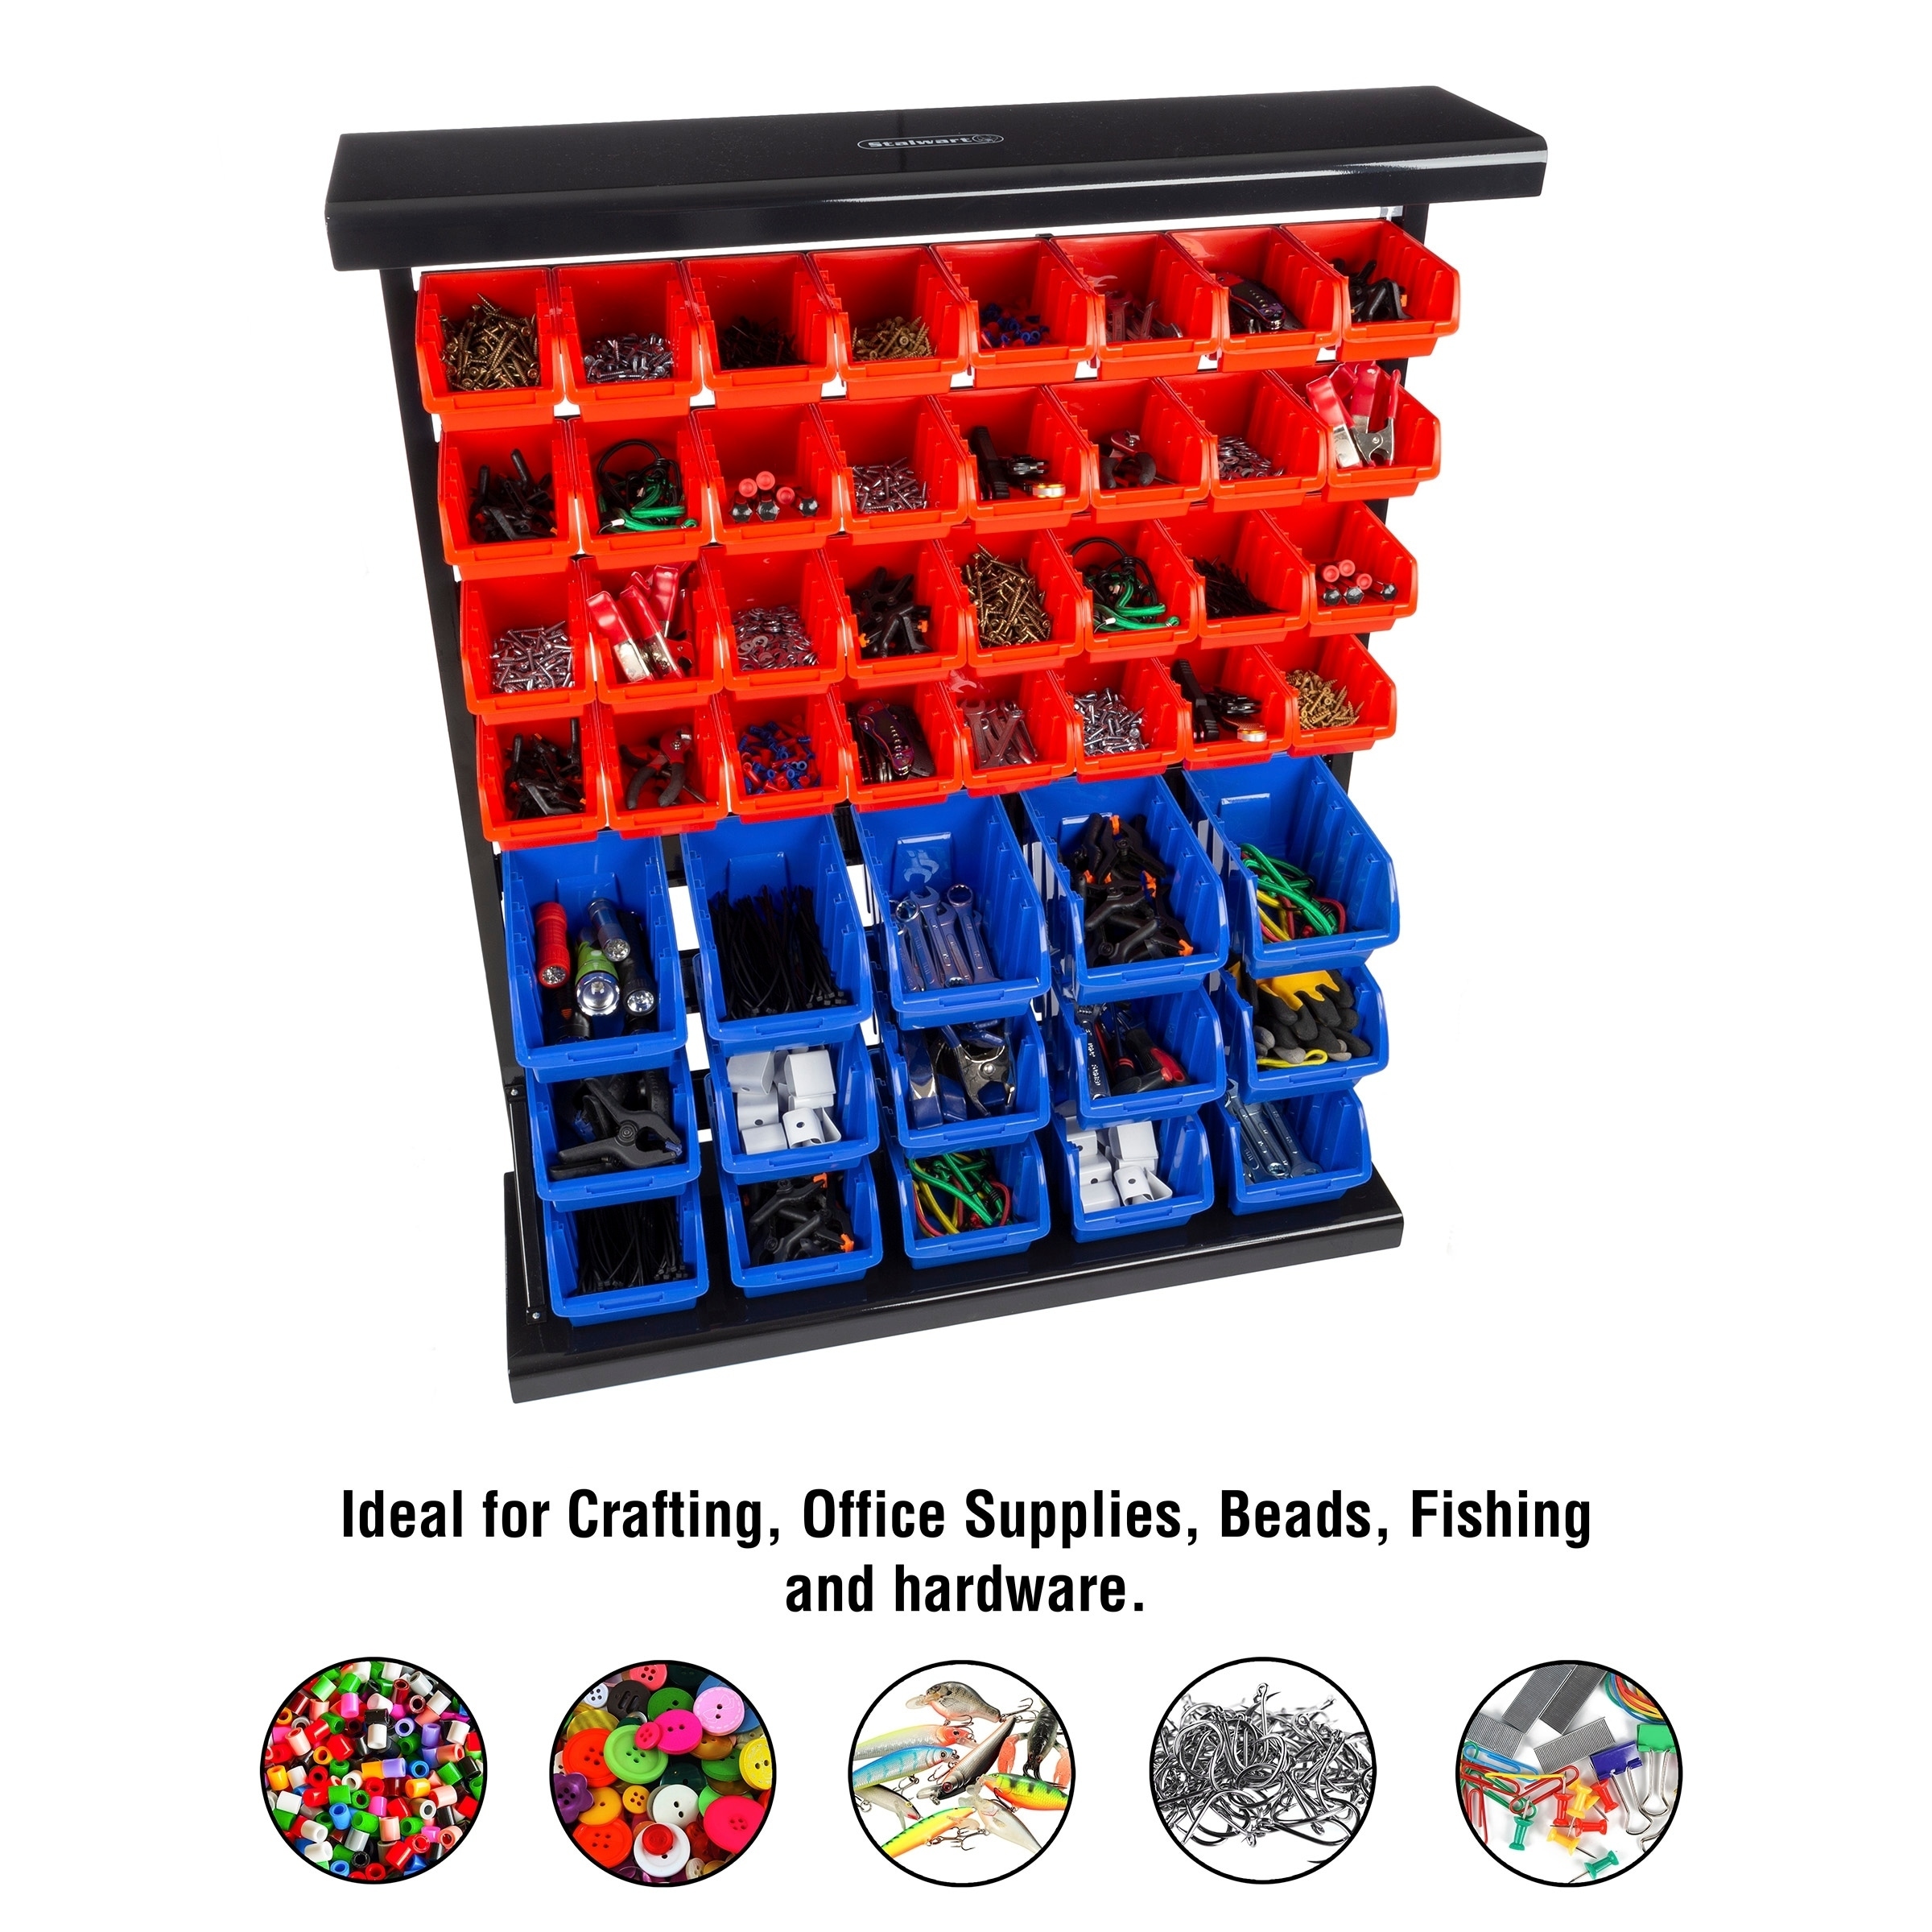 47 Bin Tool Organizer - Wall Mountable Container with Removable Drawers for  Garage Organization, Storage by Stalwart (Red/Blue)